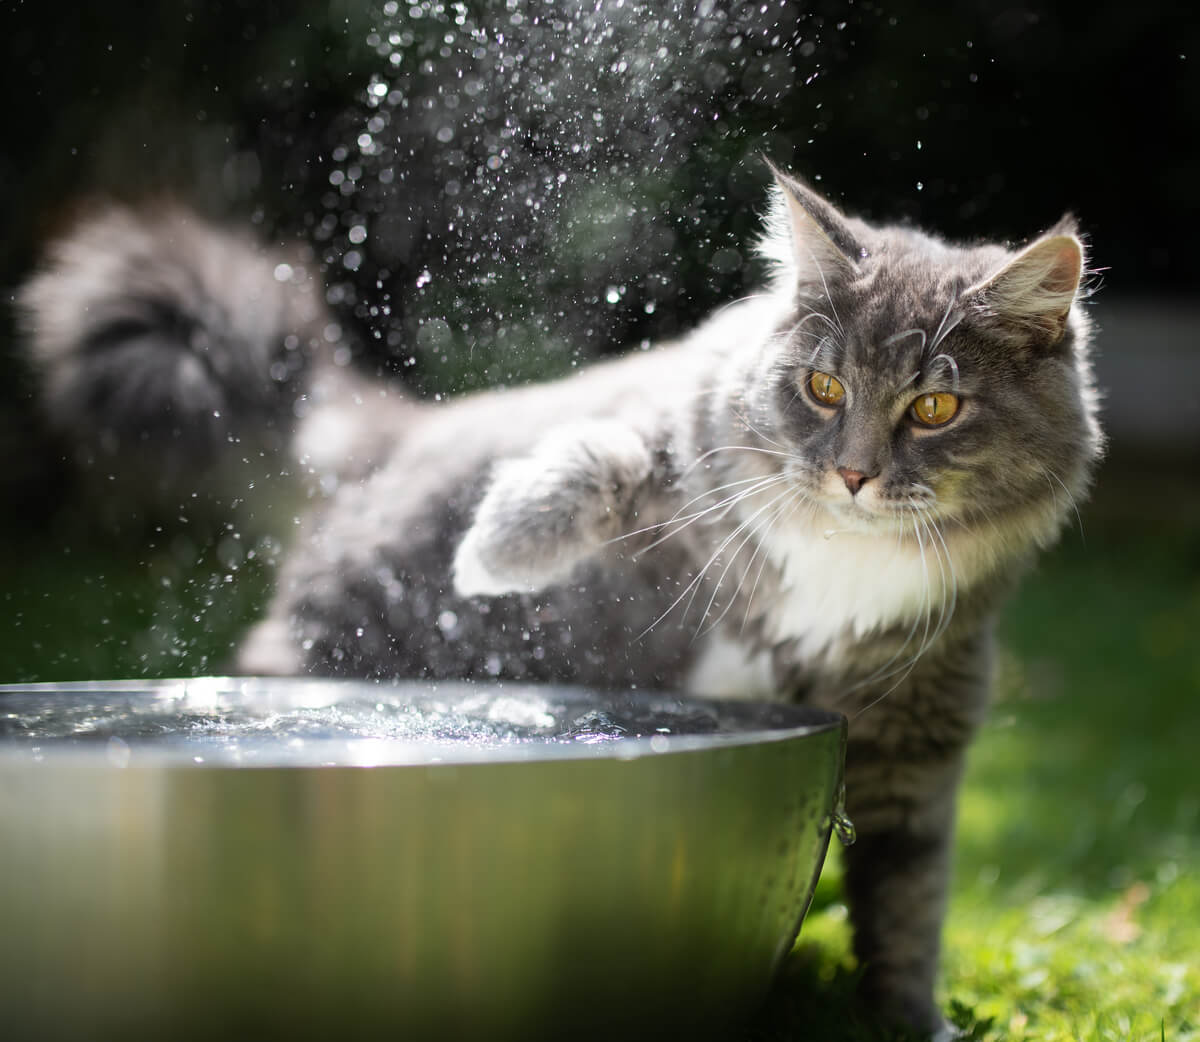 A cat playing with water.